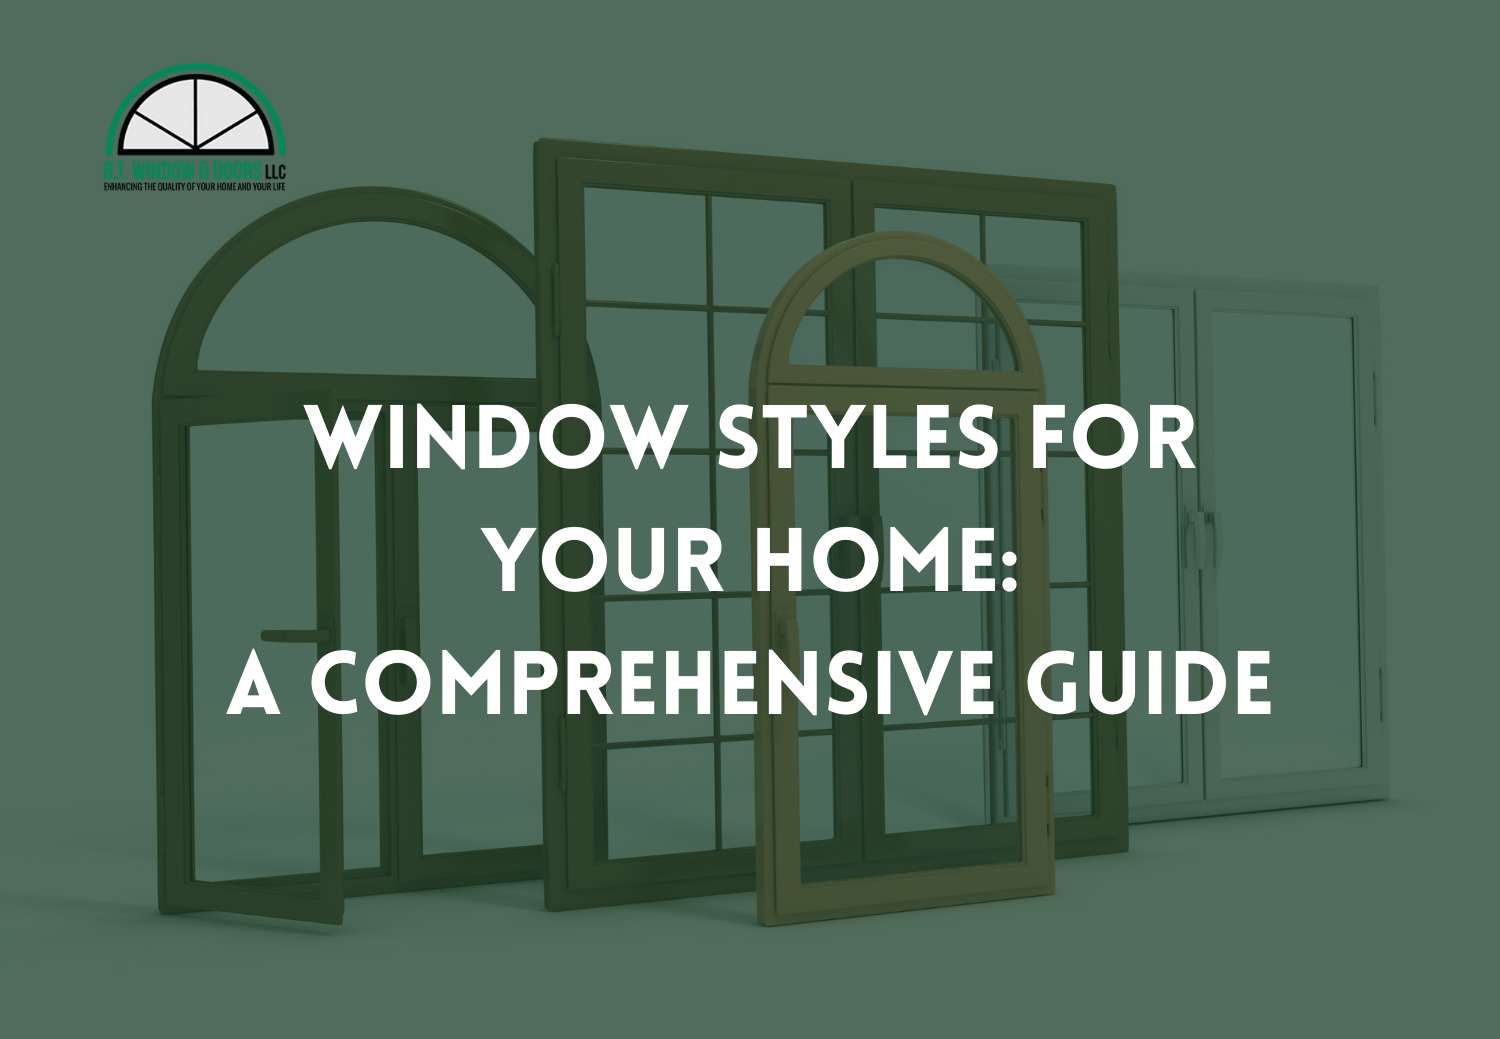 Window Styles for Your Home: A Comprehensive Guide